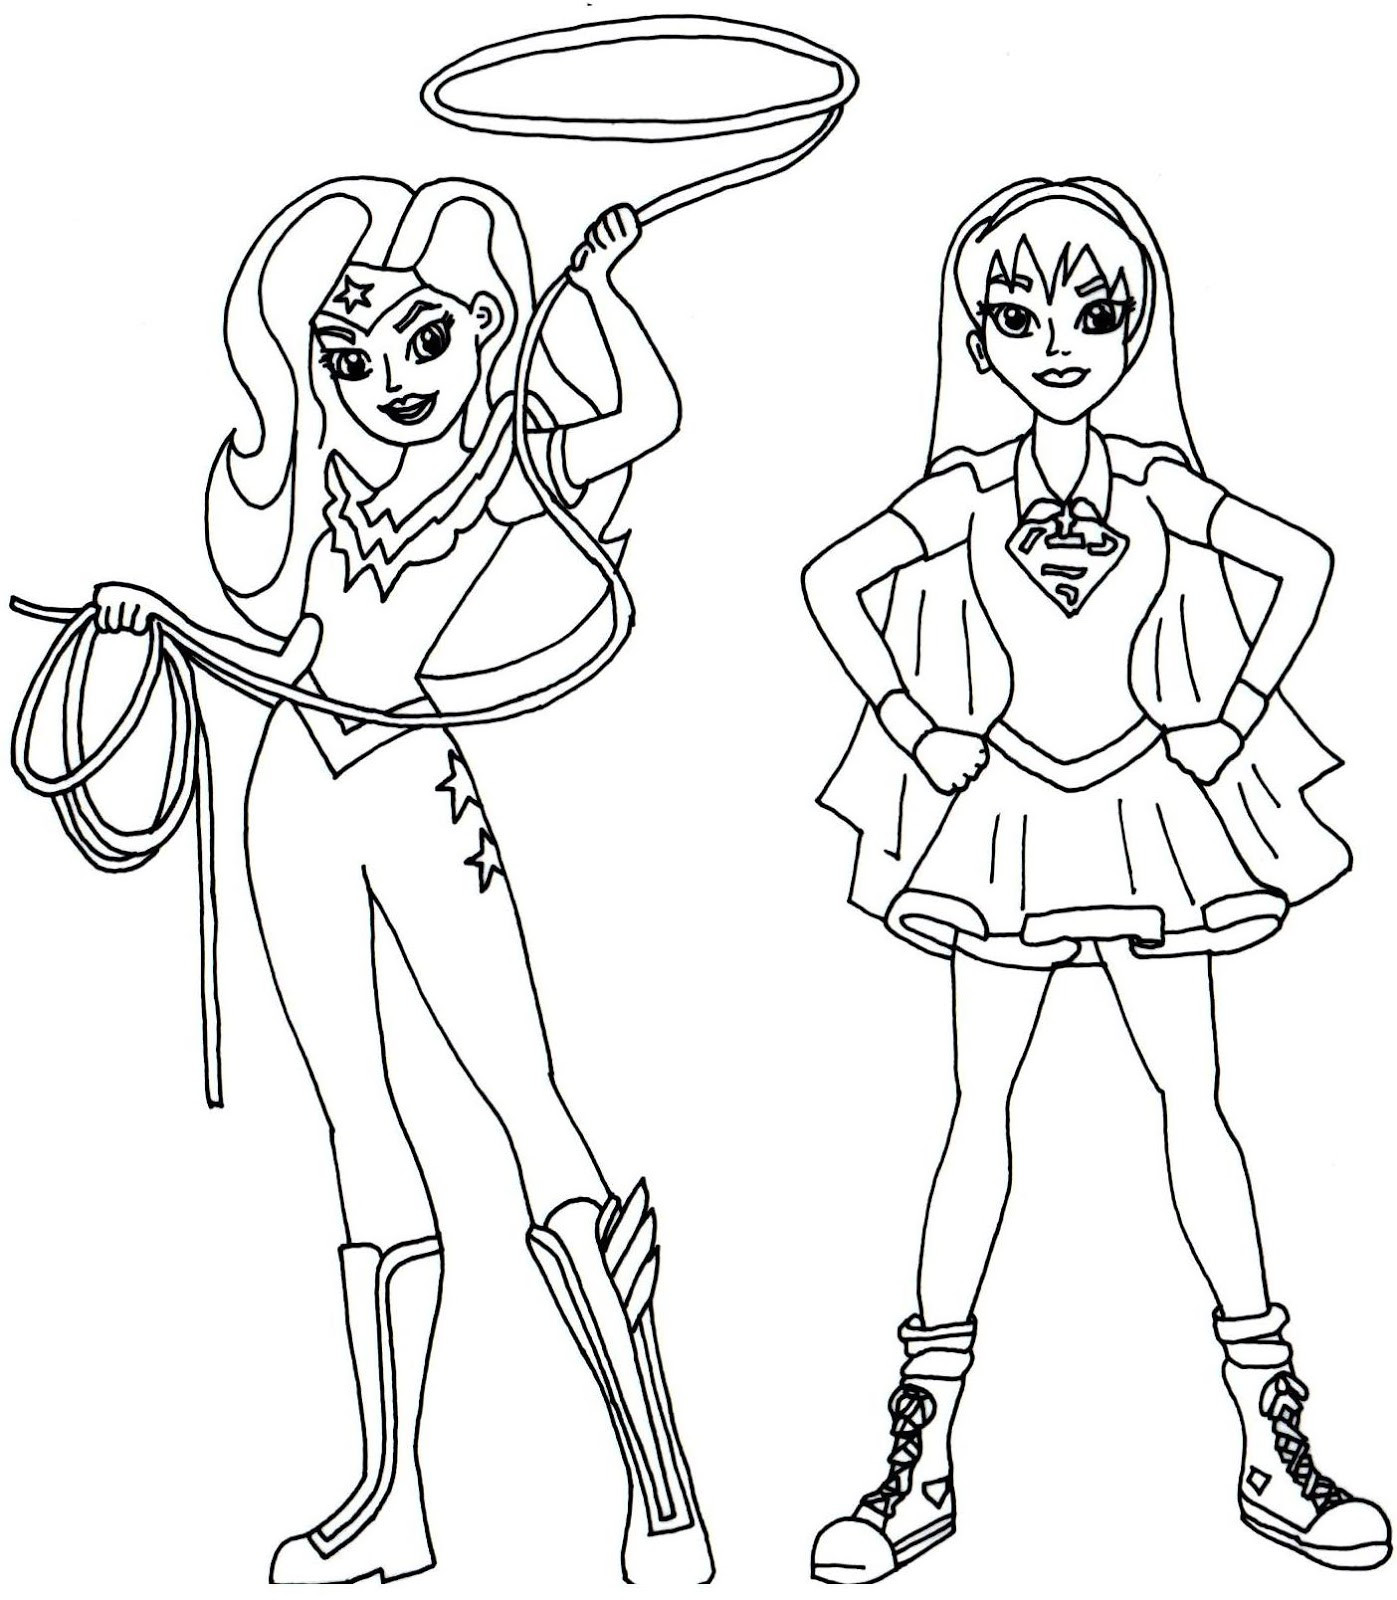 Superhero Girls Coloring Pages
 Supergirl Coloring Pages Printable Sketch Coloring Page